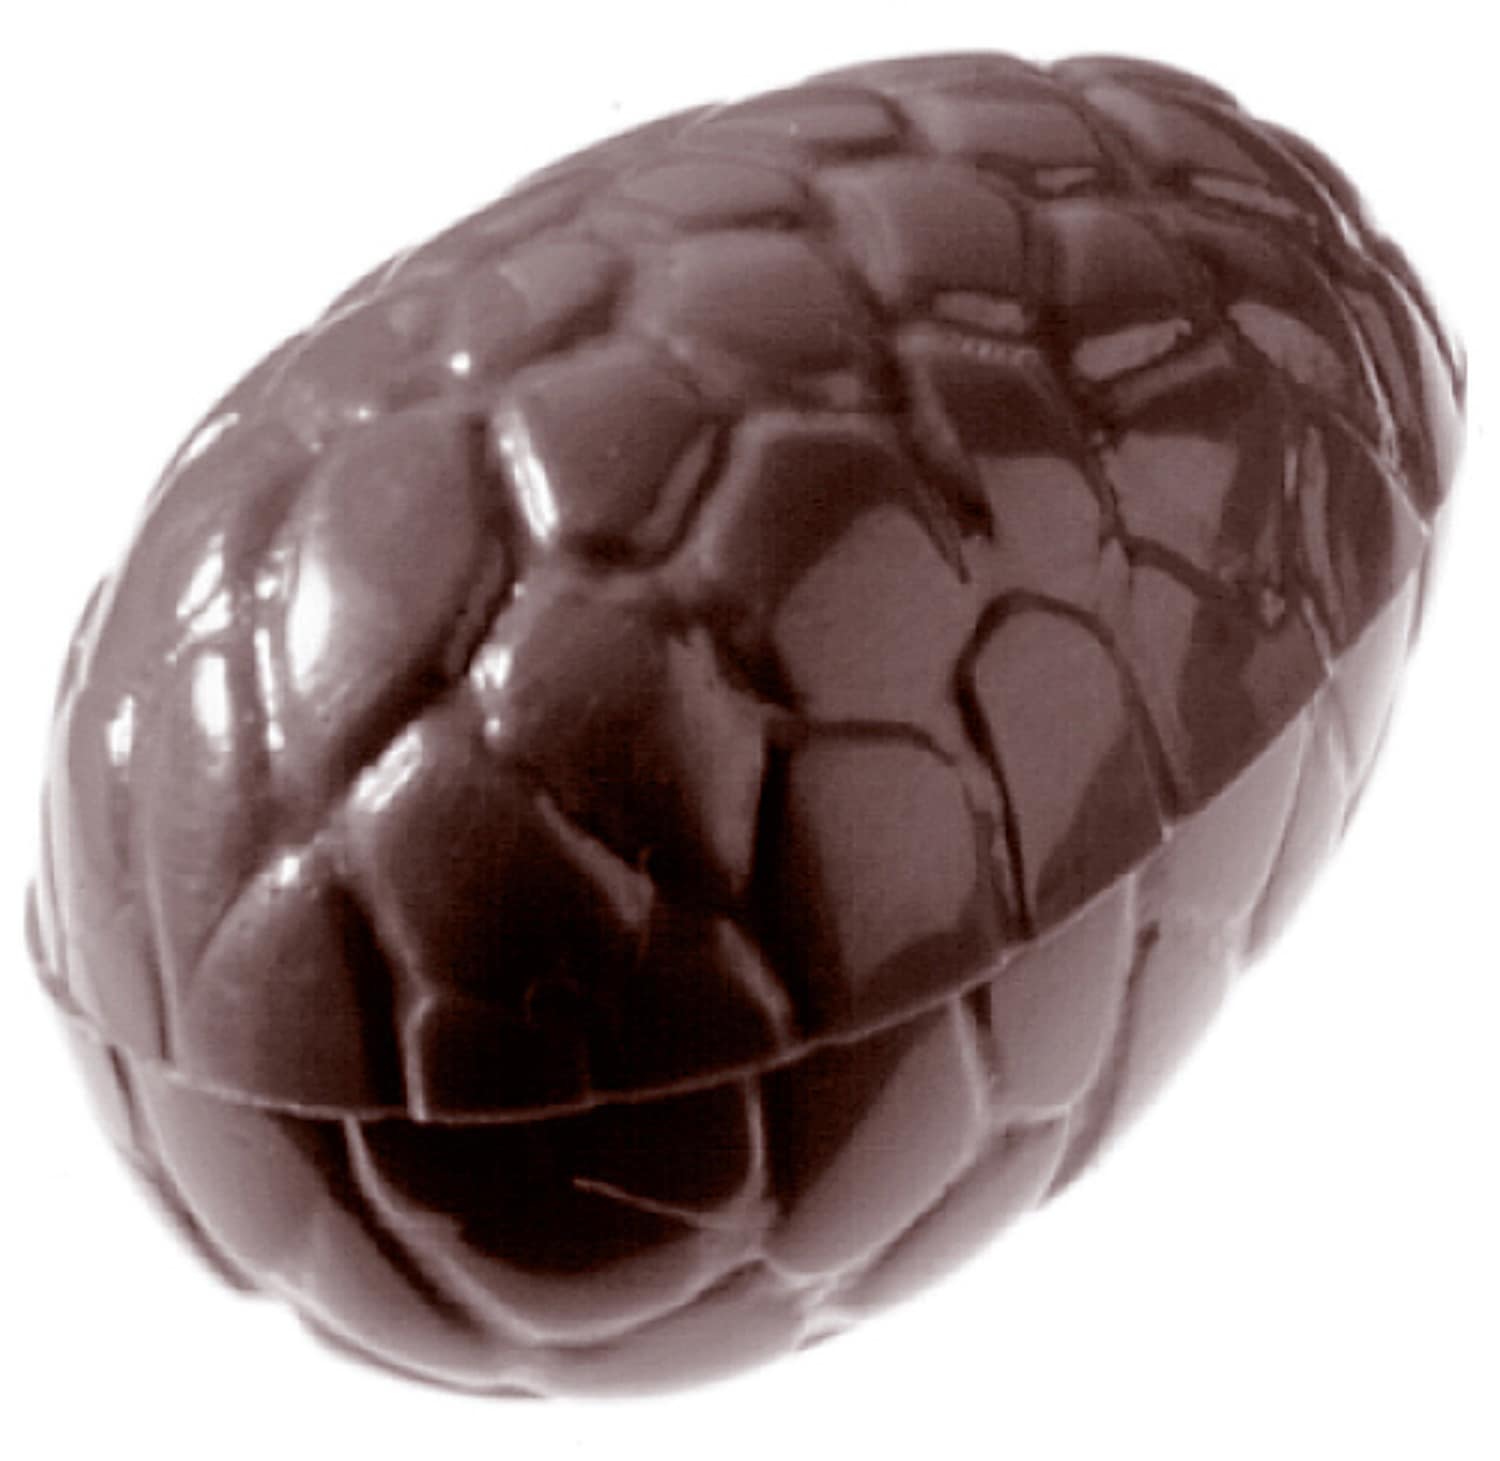 Chocolate mould "Easter egg" 421266 421266